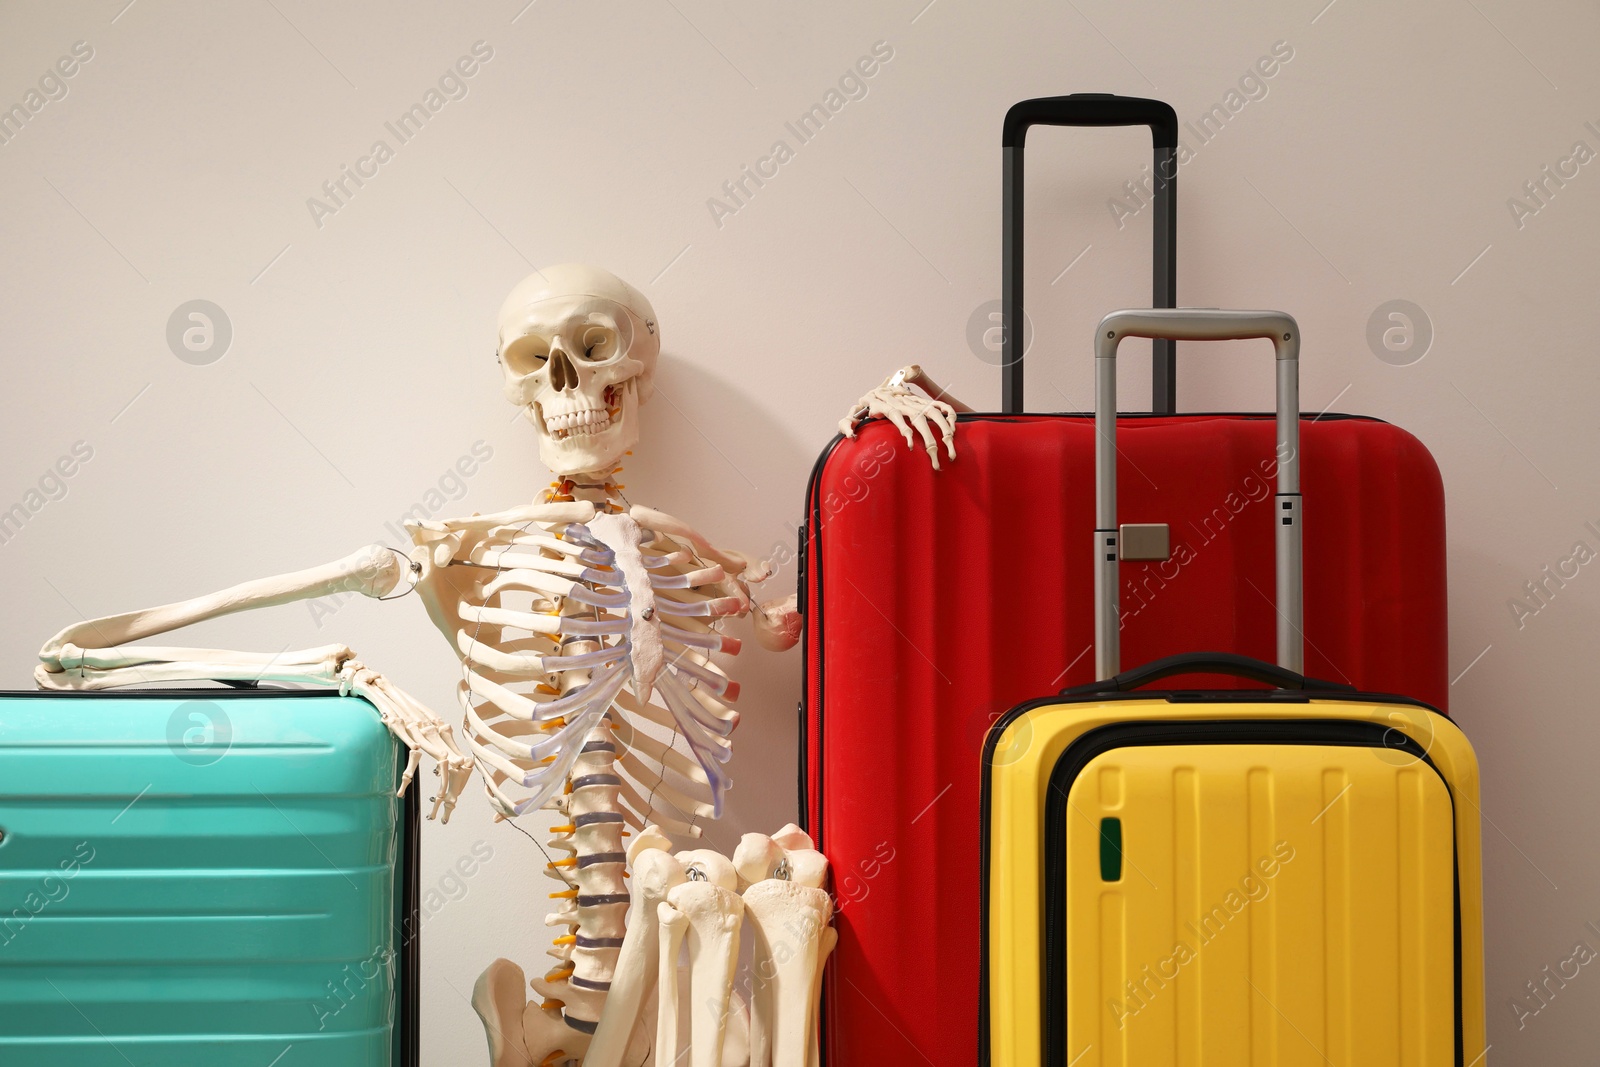 Photo of Waiting concept. Human skeleton with suitcases near light grey wall